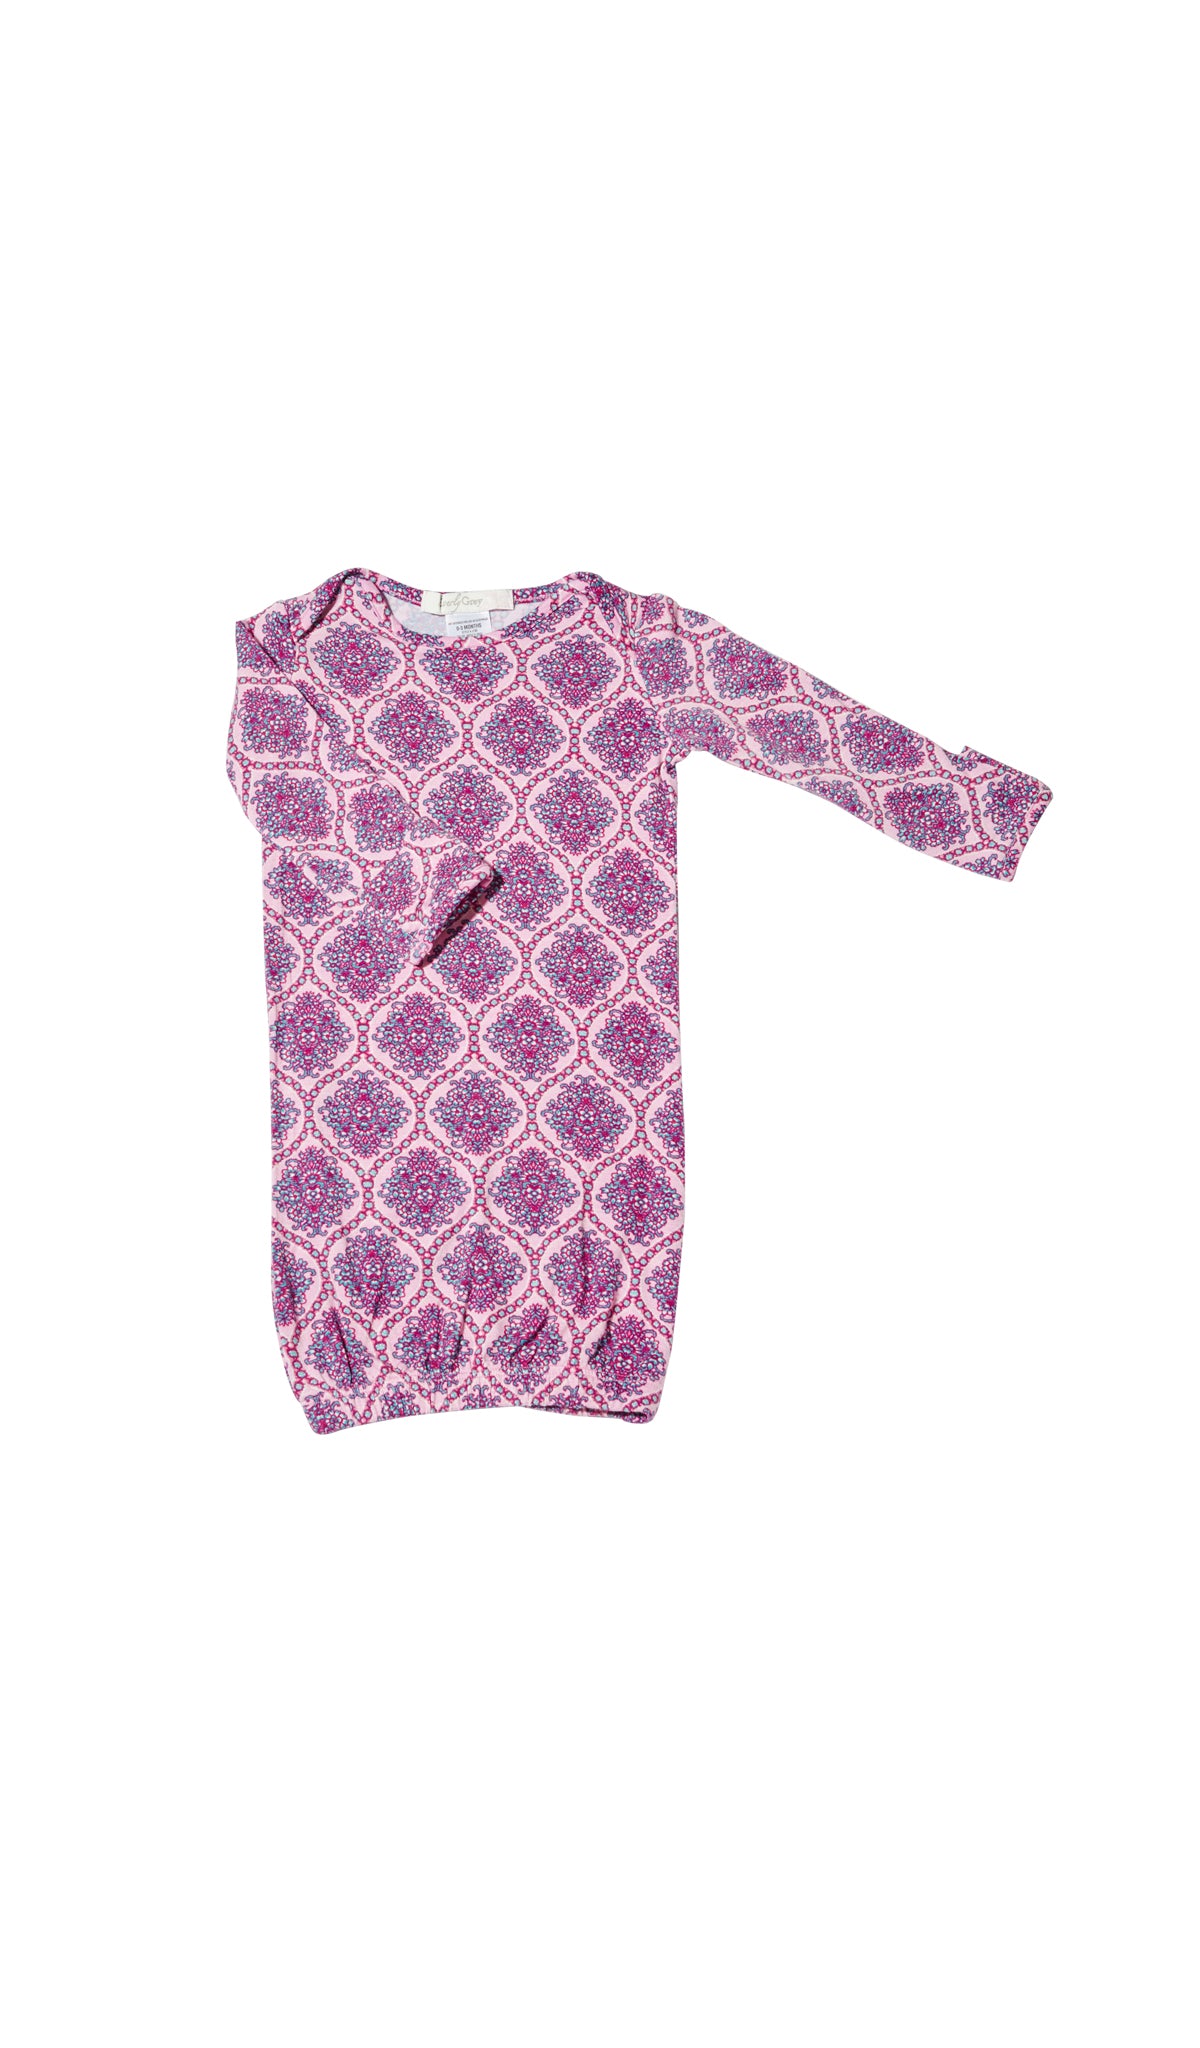 India Floral Adalia 4-Piece Set, long sleeve gown with elastic hem for baby.